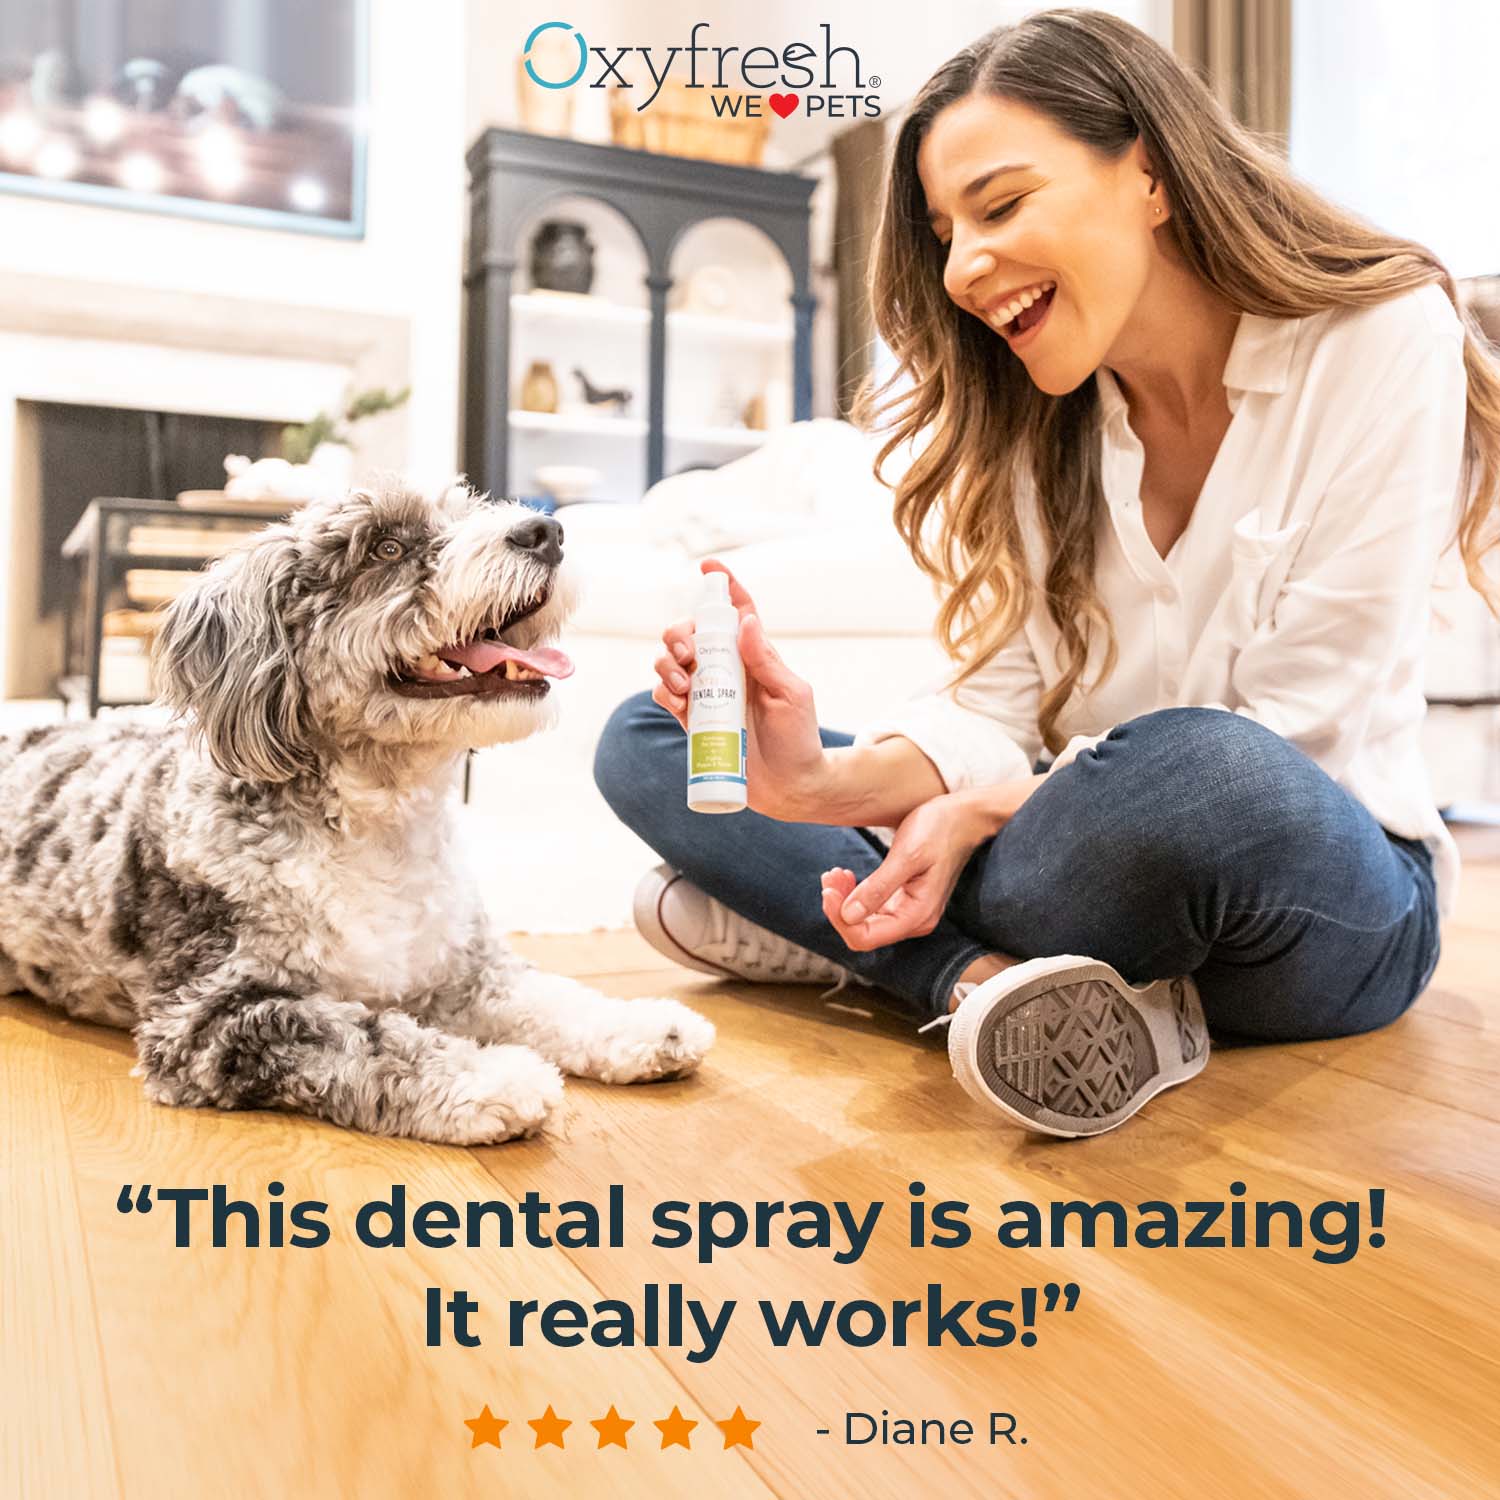 oxyfresh-pet-dental-spray-review-"This-dental-spray-is-amazing!-It-really-works!"